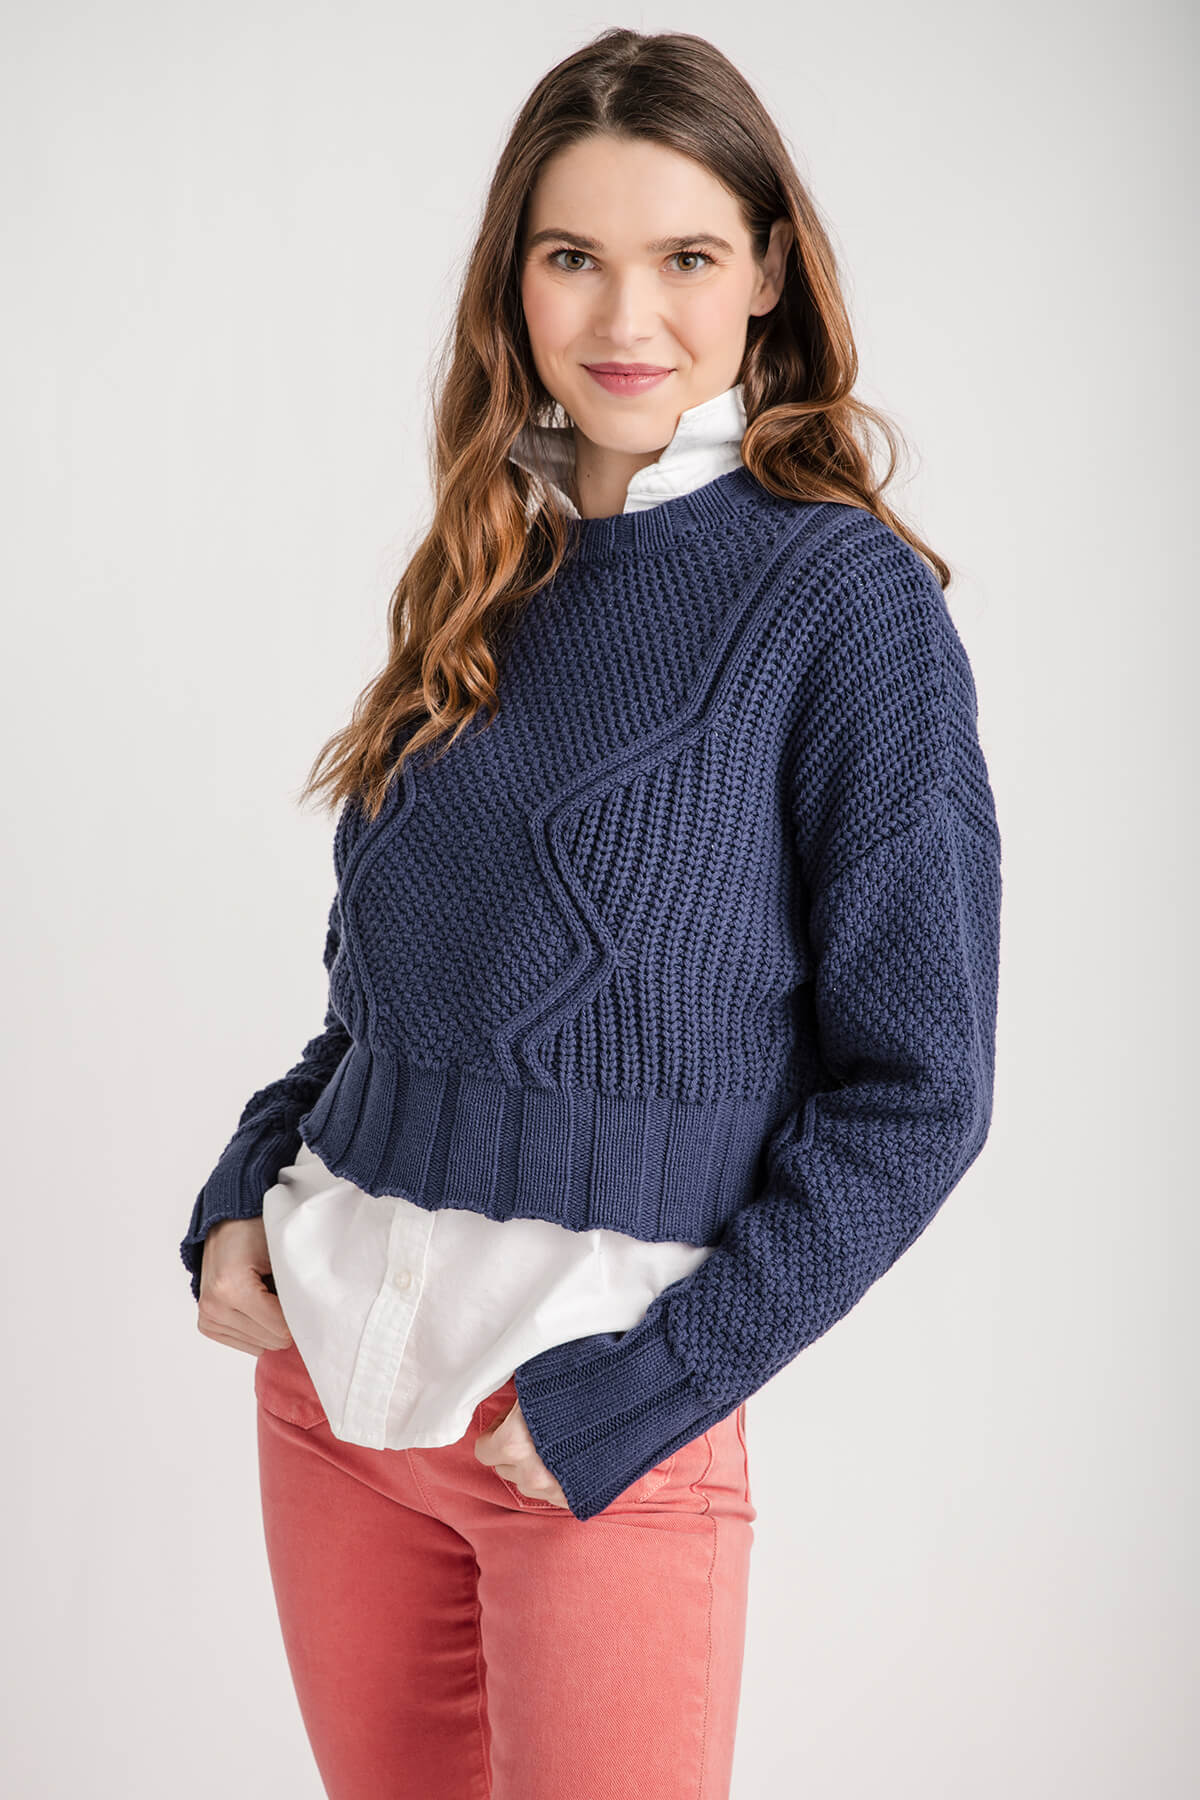 All Row Cotton Cable Sweater